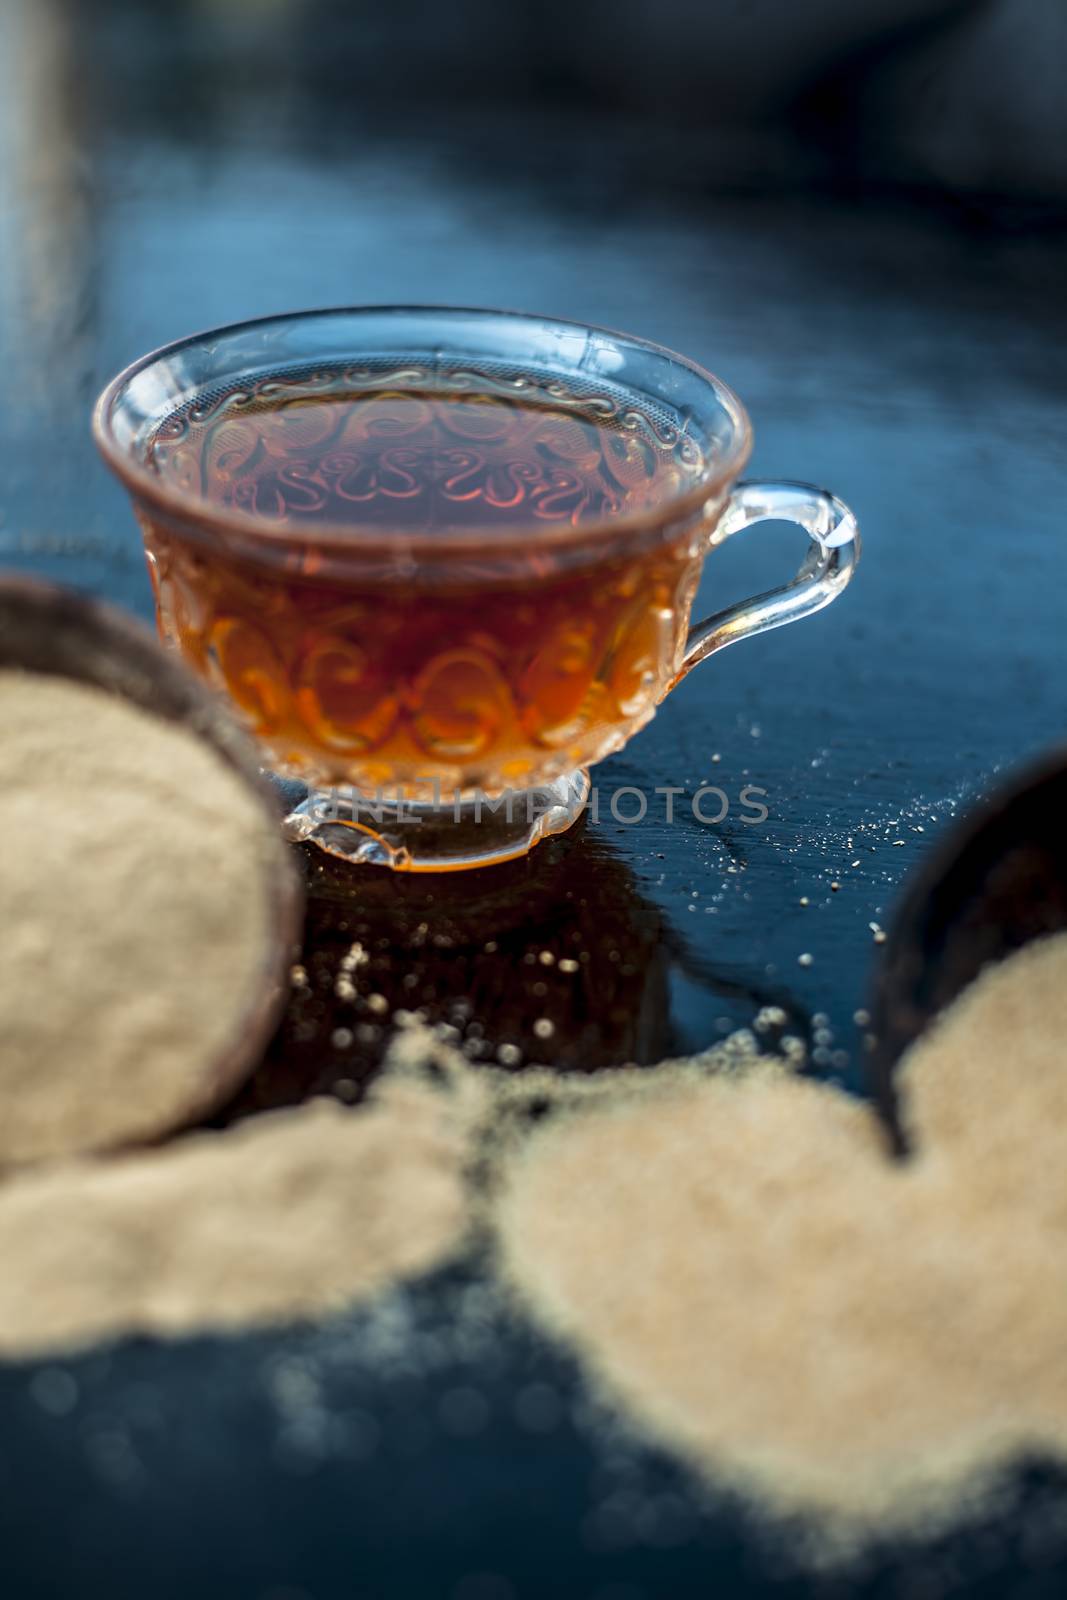 Clay bowl on wooden surface full of Poppy seeds or khus or opium poppy or bread seed poppy with its extracted herbal and organic plus beneficial detoxifying drink or tea in a transparent glass cup.